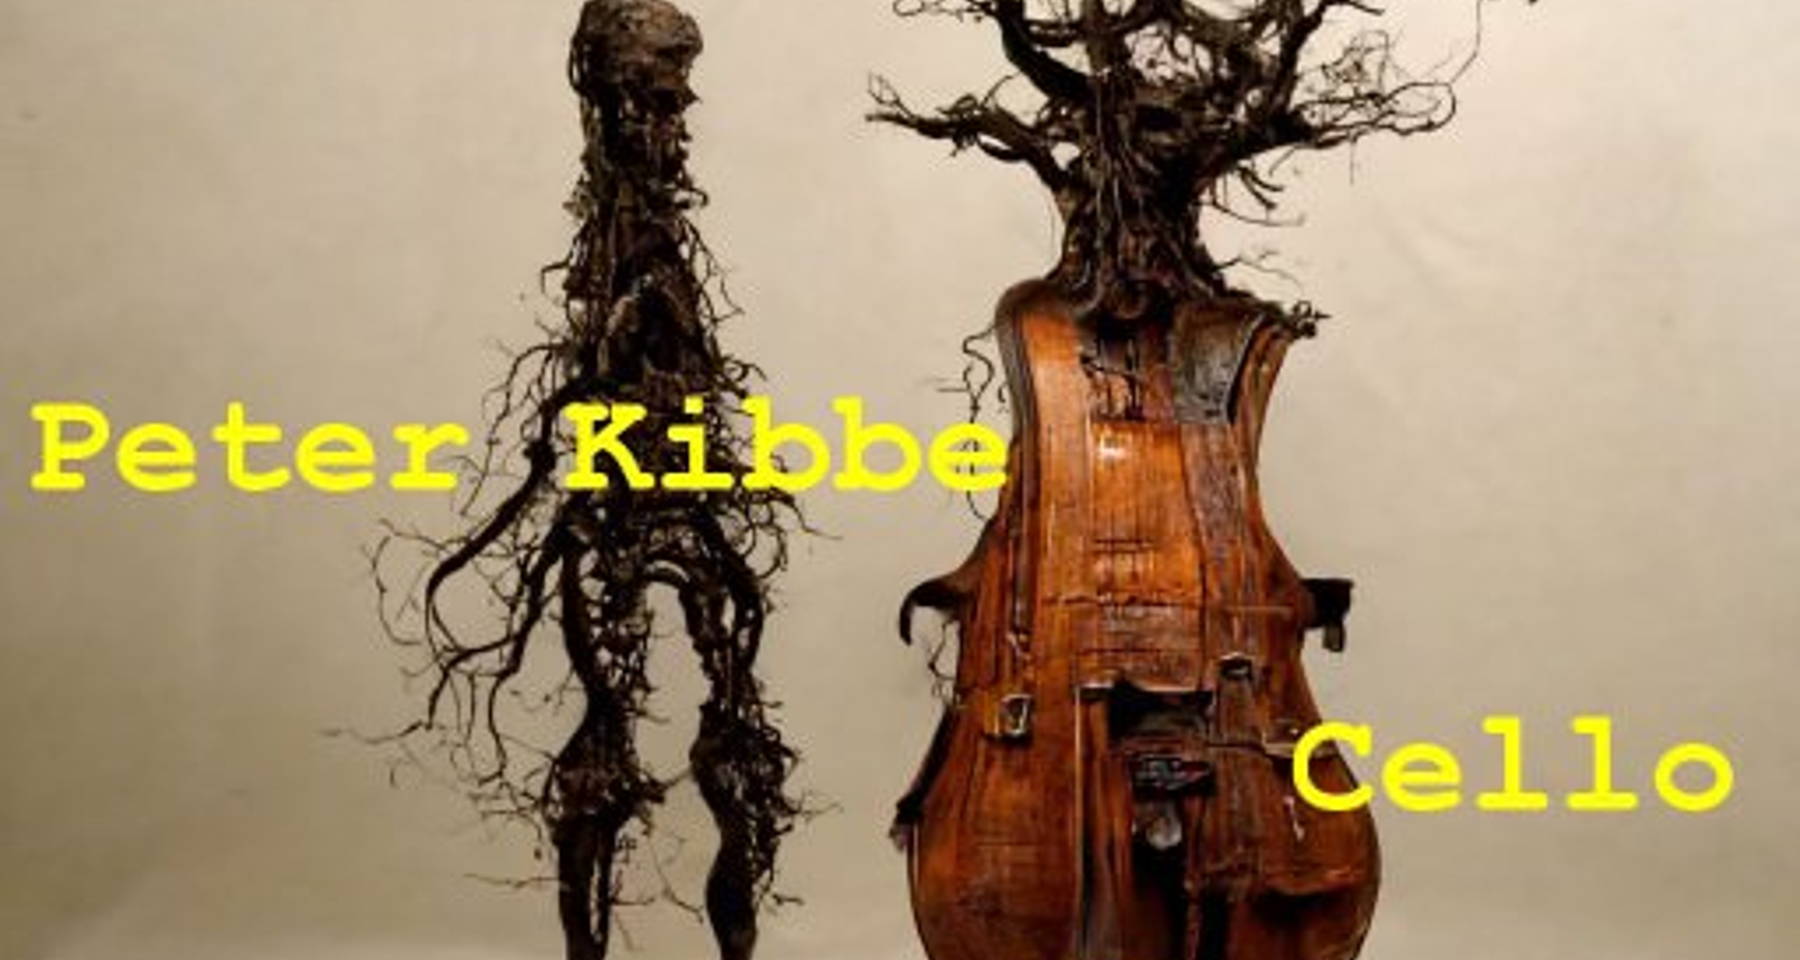 Music of the 21st Century with Cellist Peter Kibbe